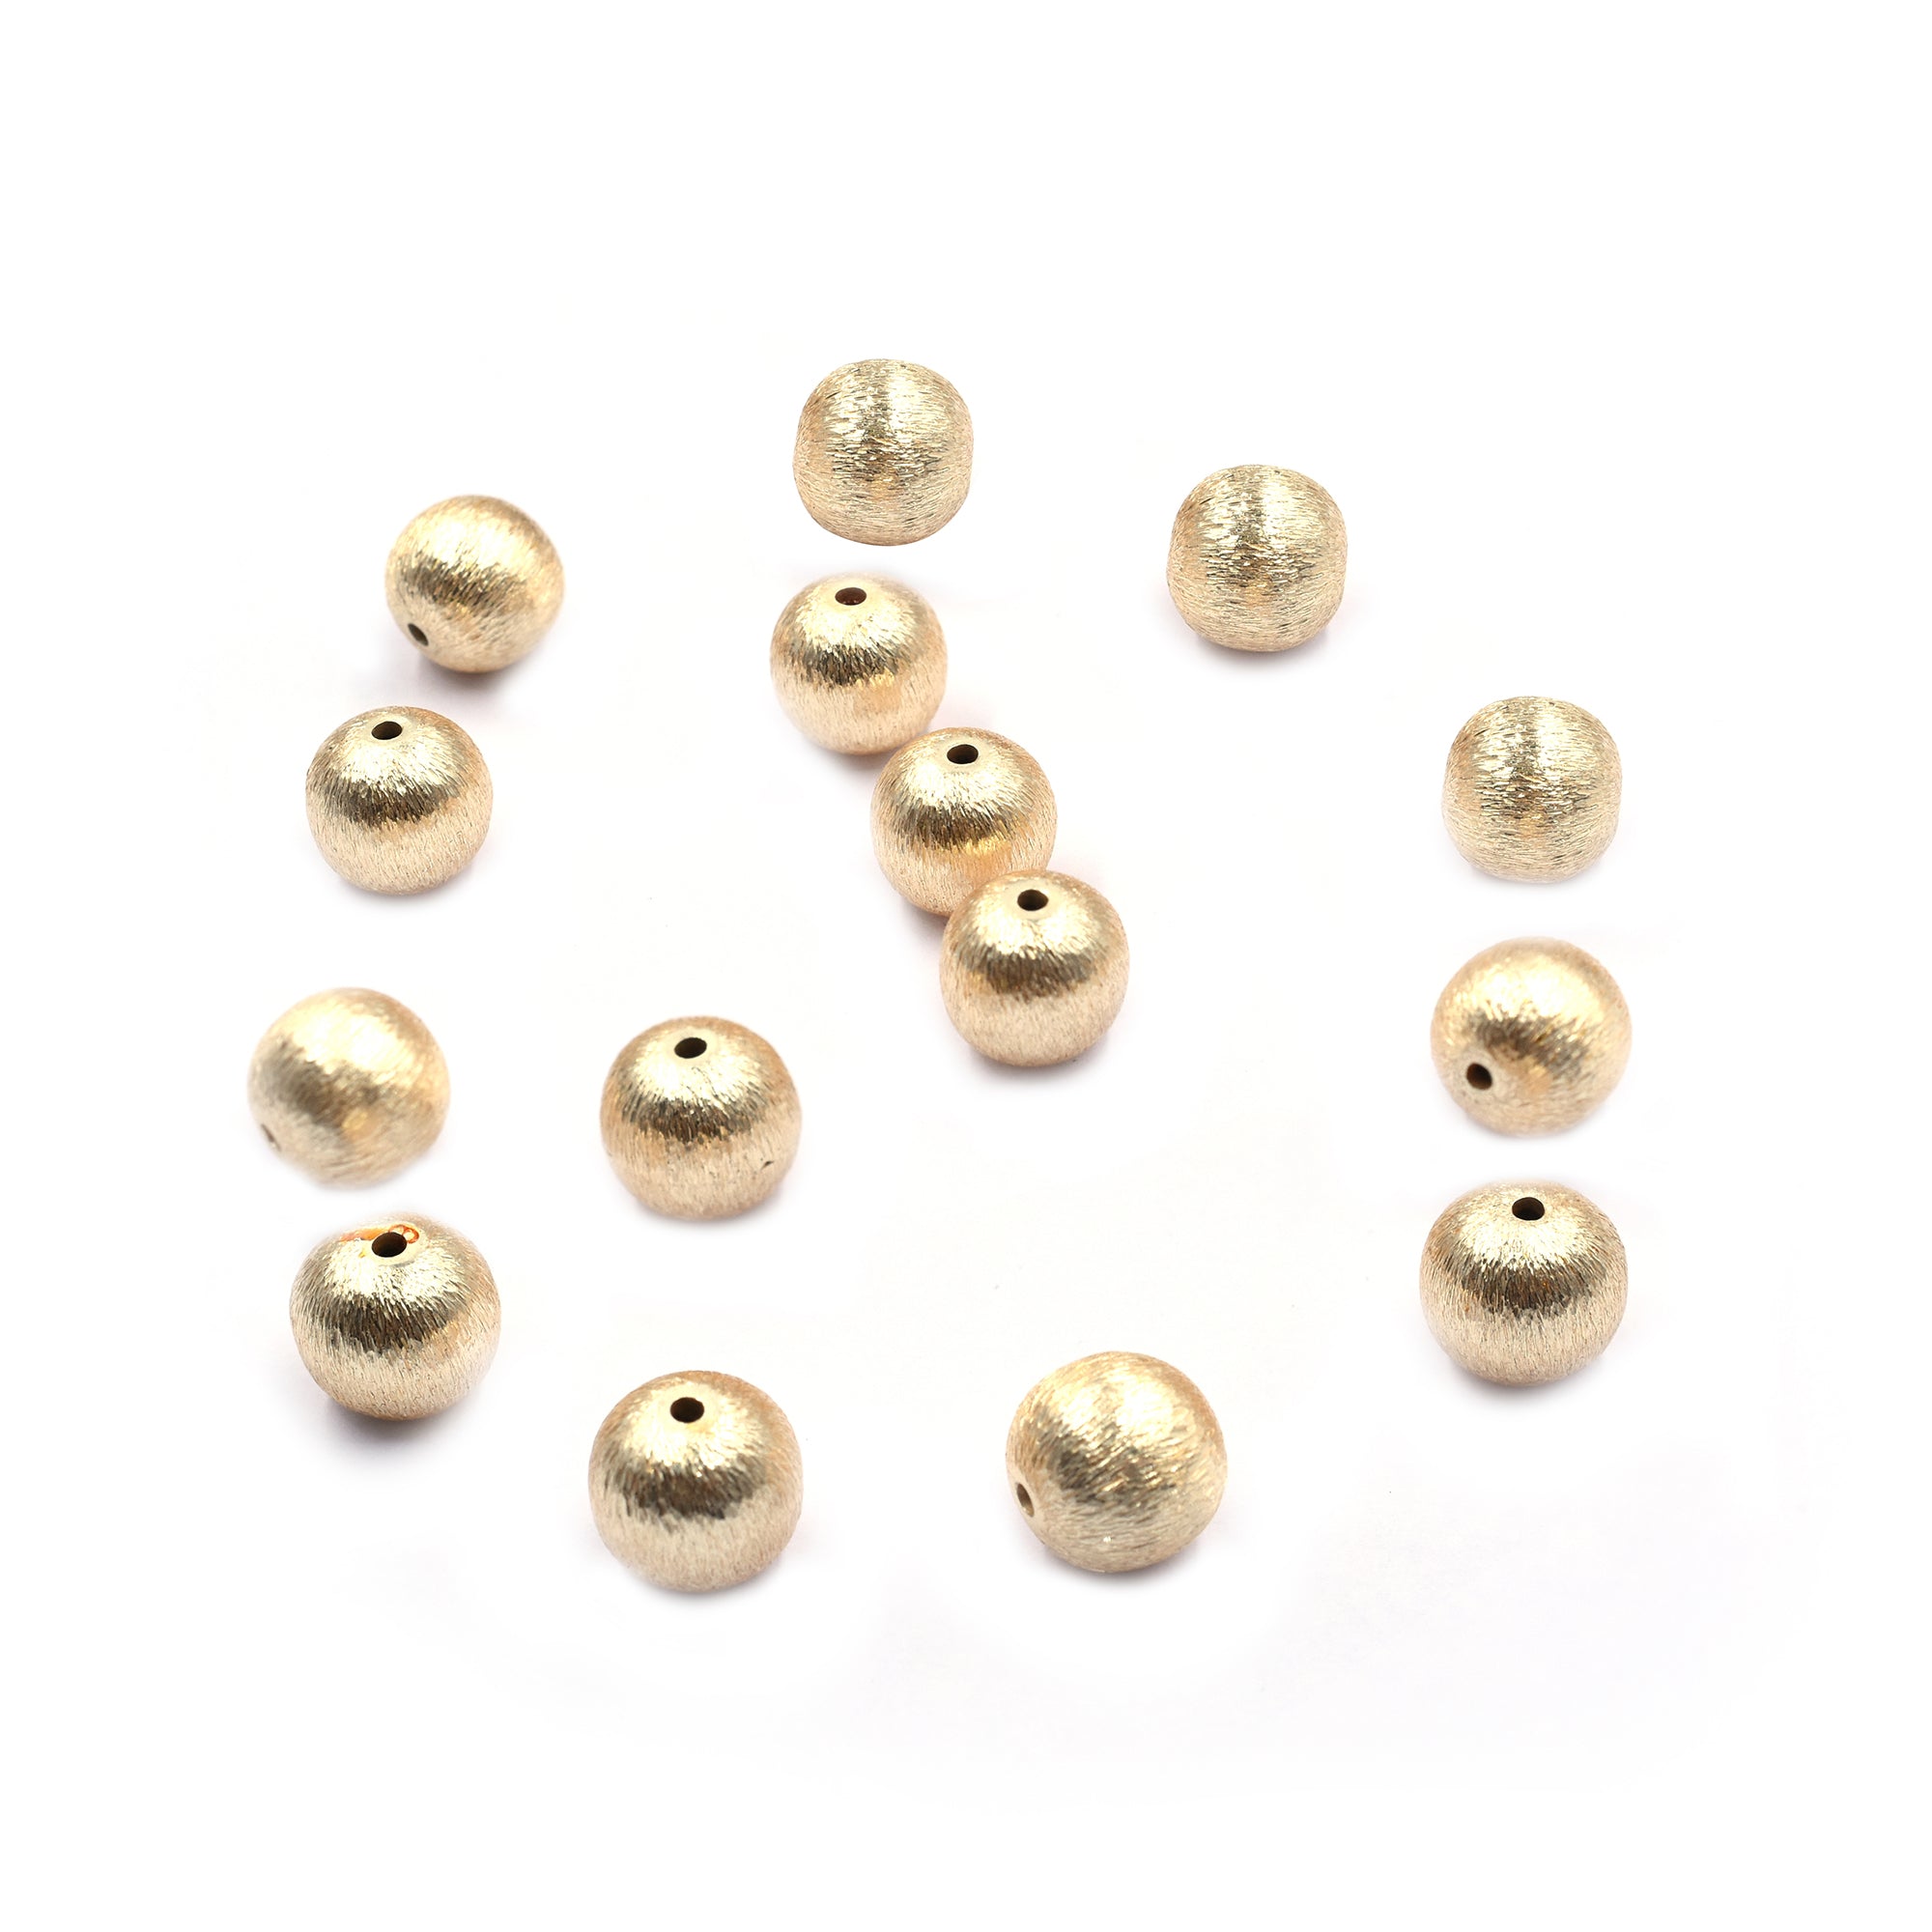 20 Pcs 10mm Balls Brushed Matte Finish Beads Gold Plated Copper